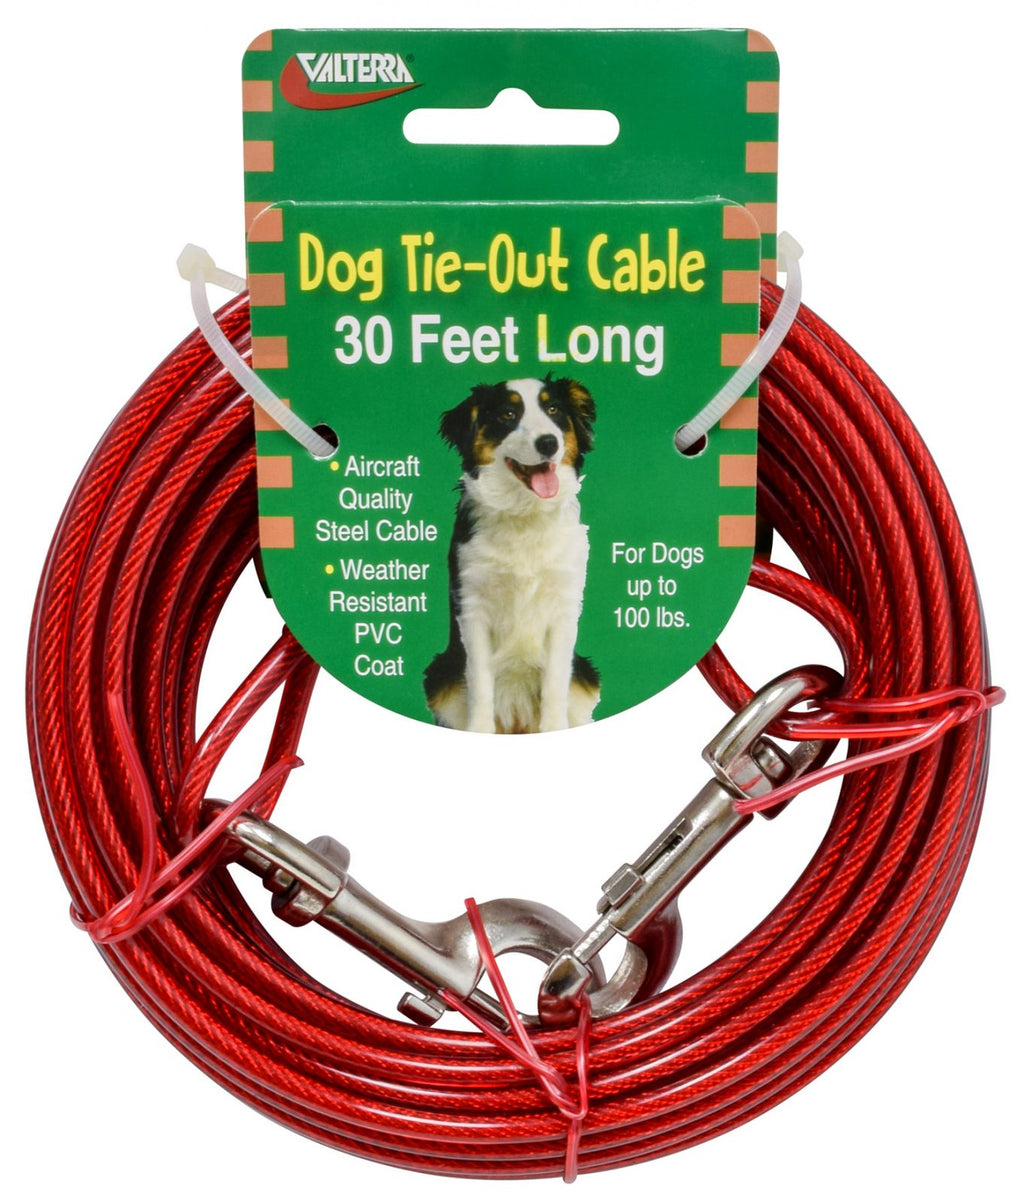 Dog Tie-Out Cable - 30' - A10-2012VP